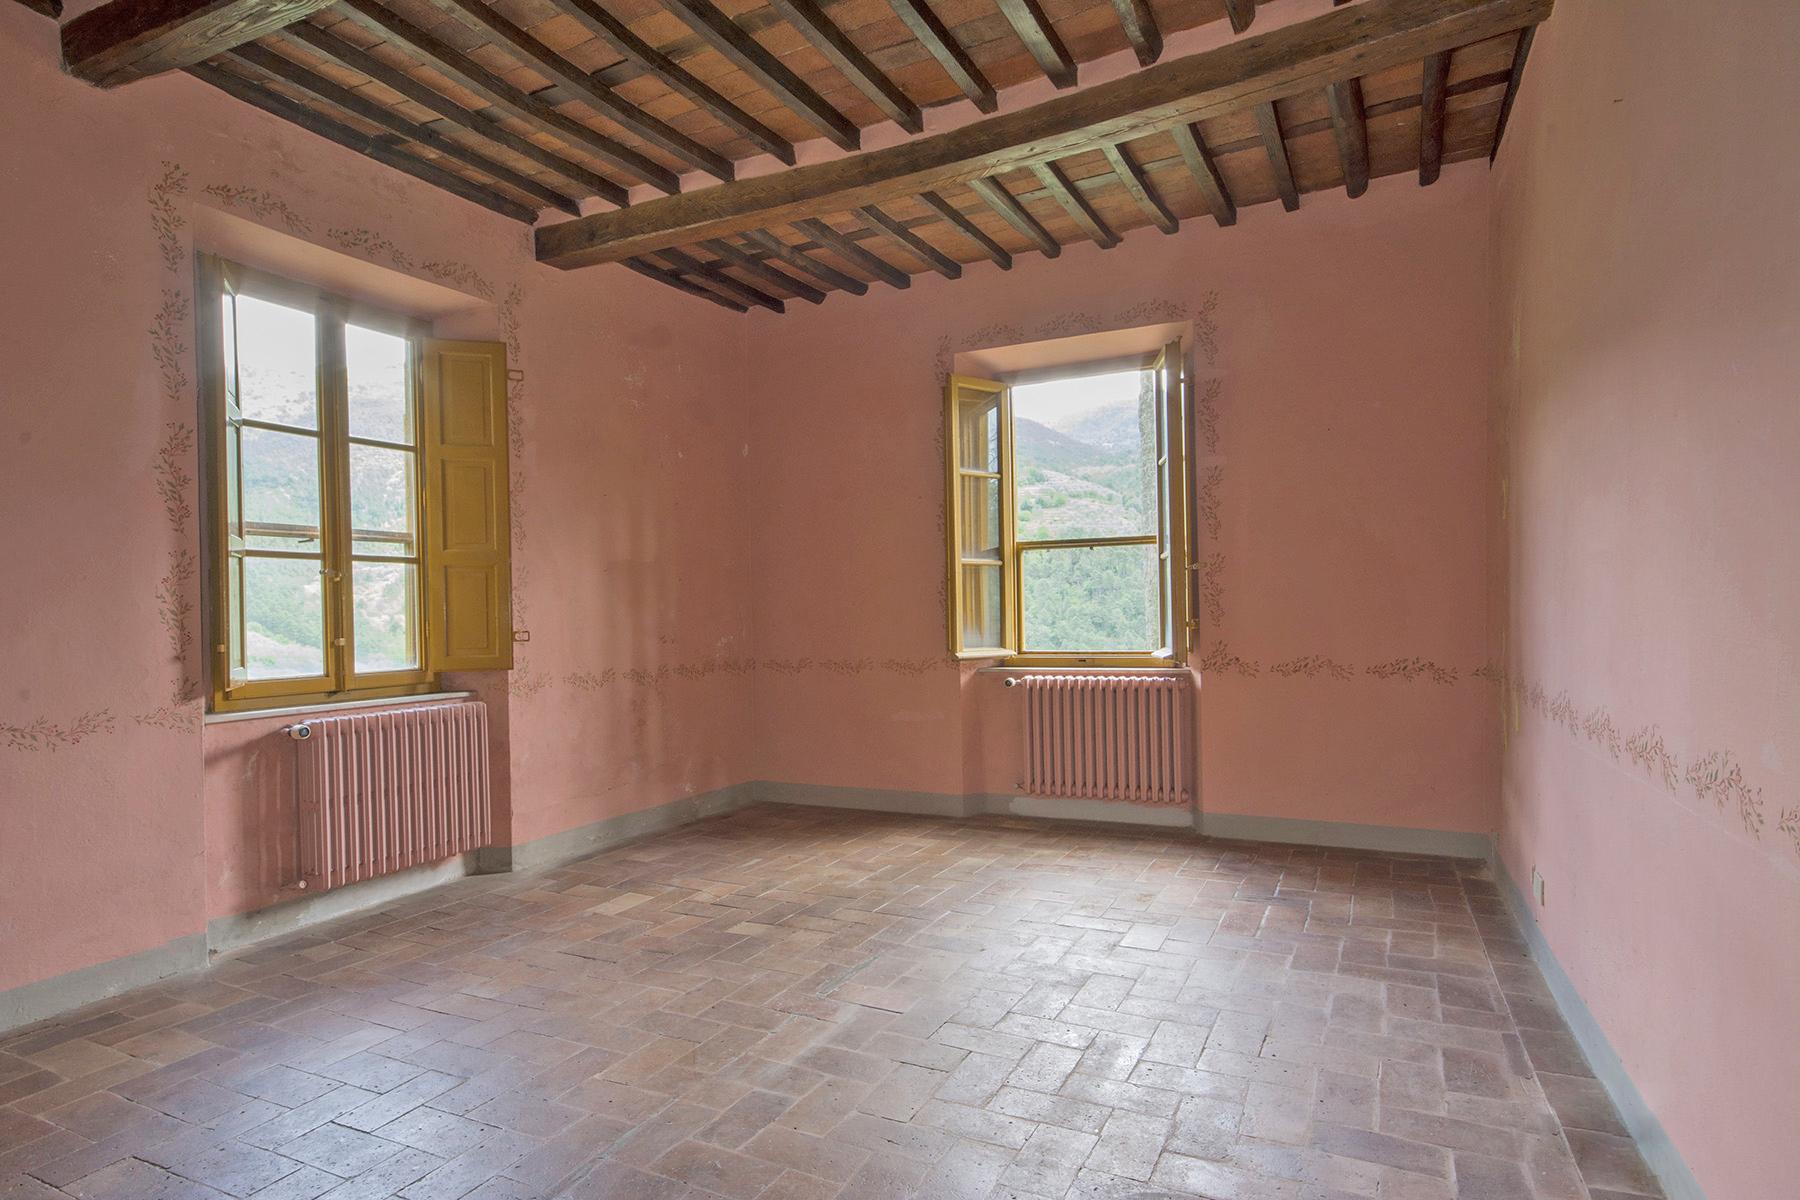 Stunning villa with breathtaking views of the Lucca countryside - 10